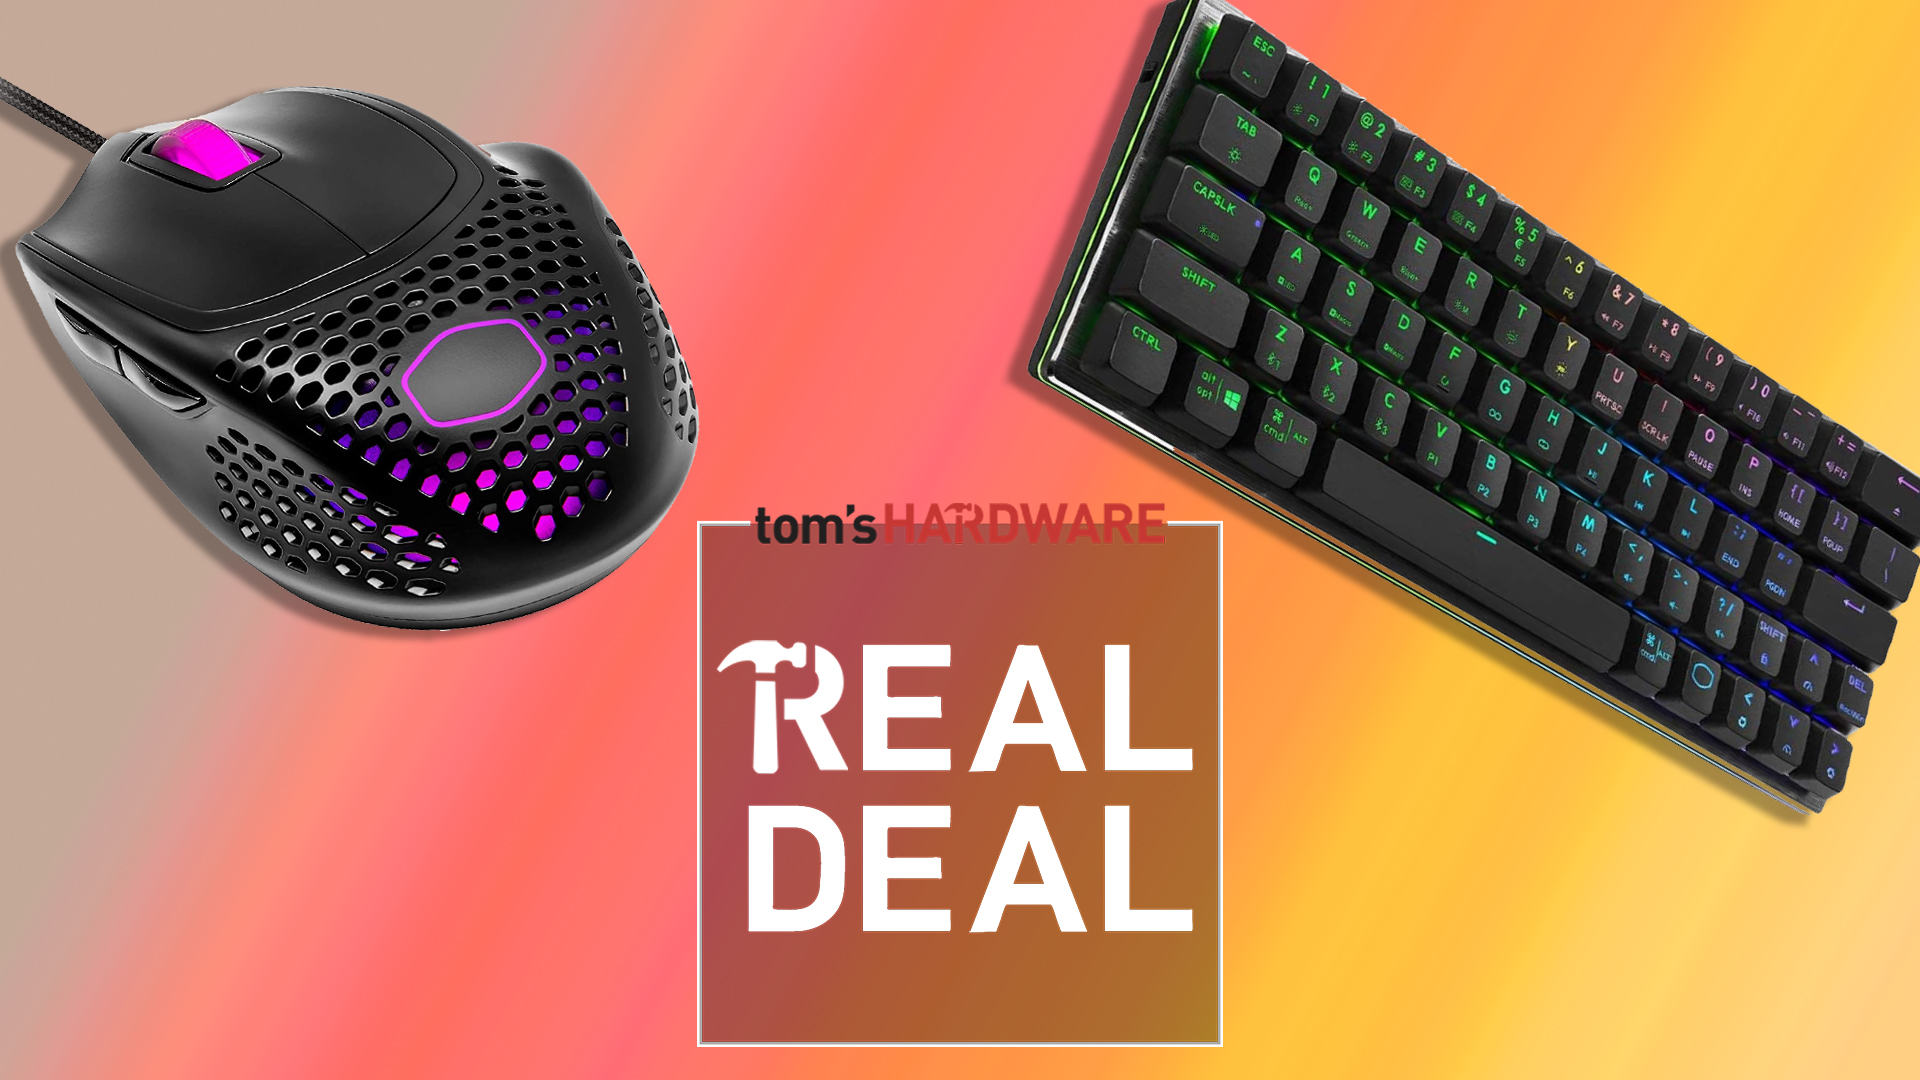 Get up to $50 off This Cooler Master Gaming Keyboard and Mouse